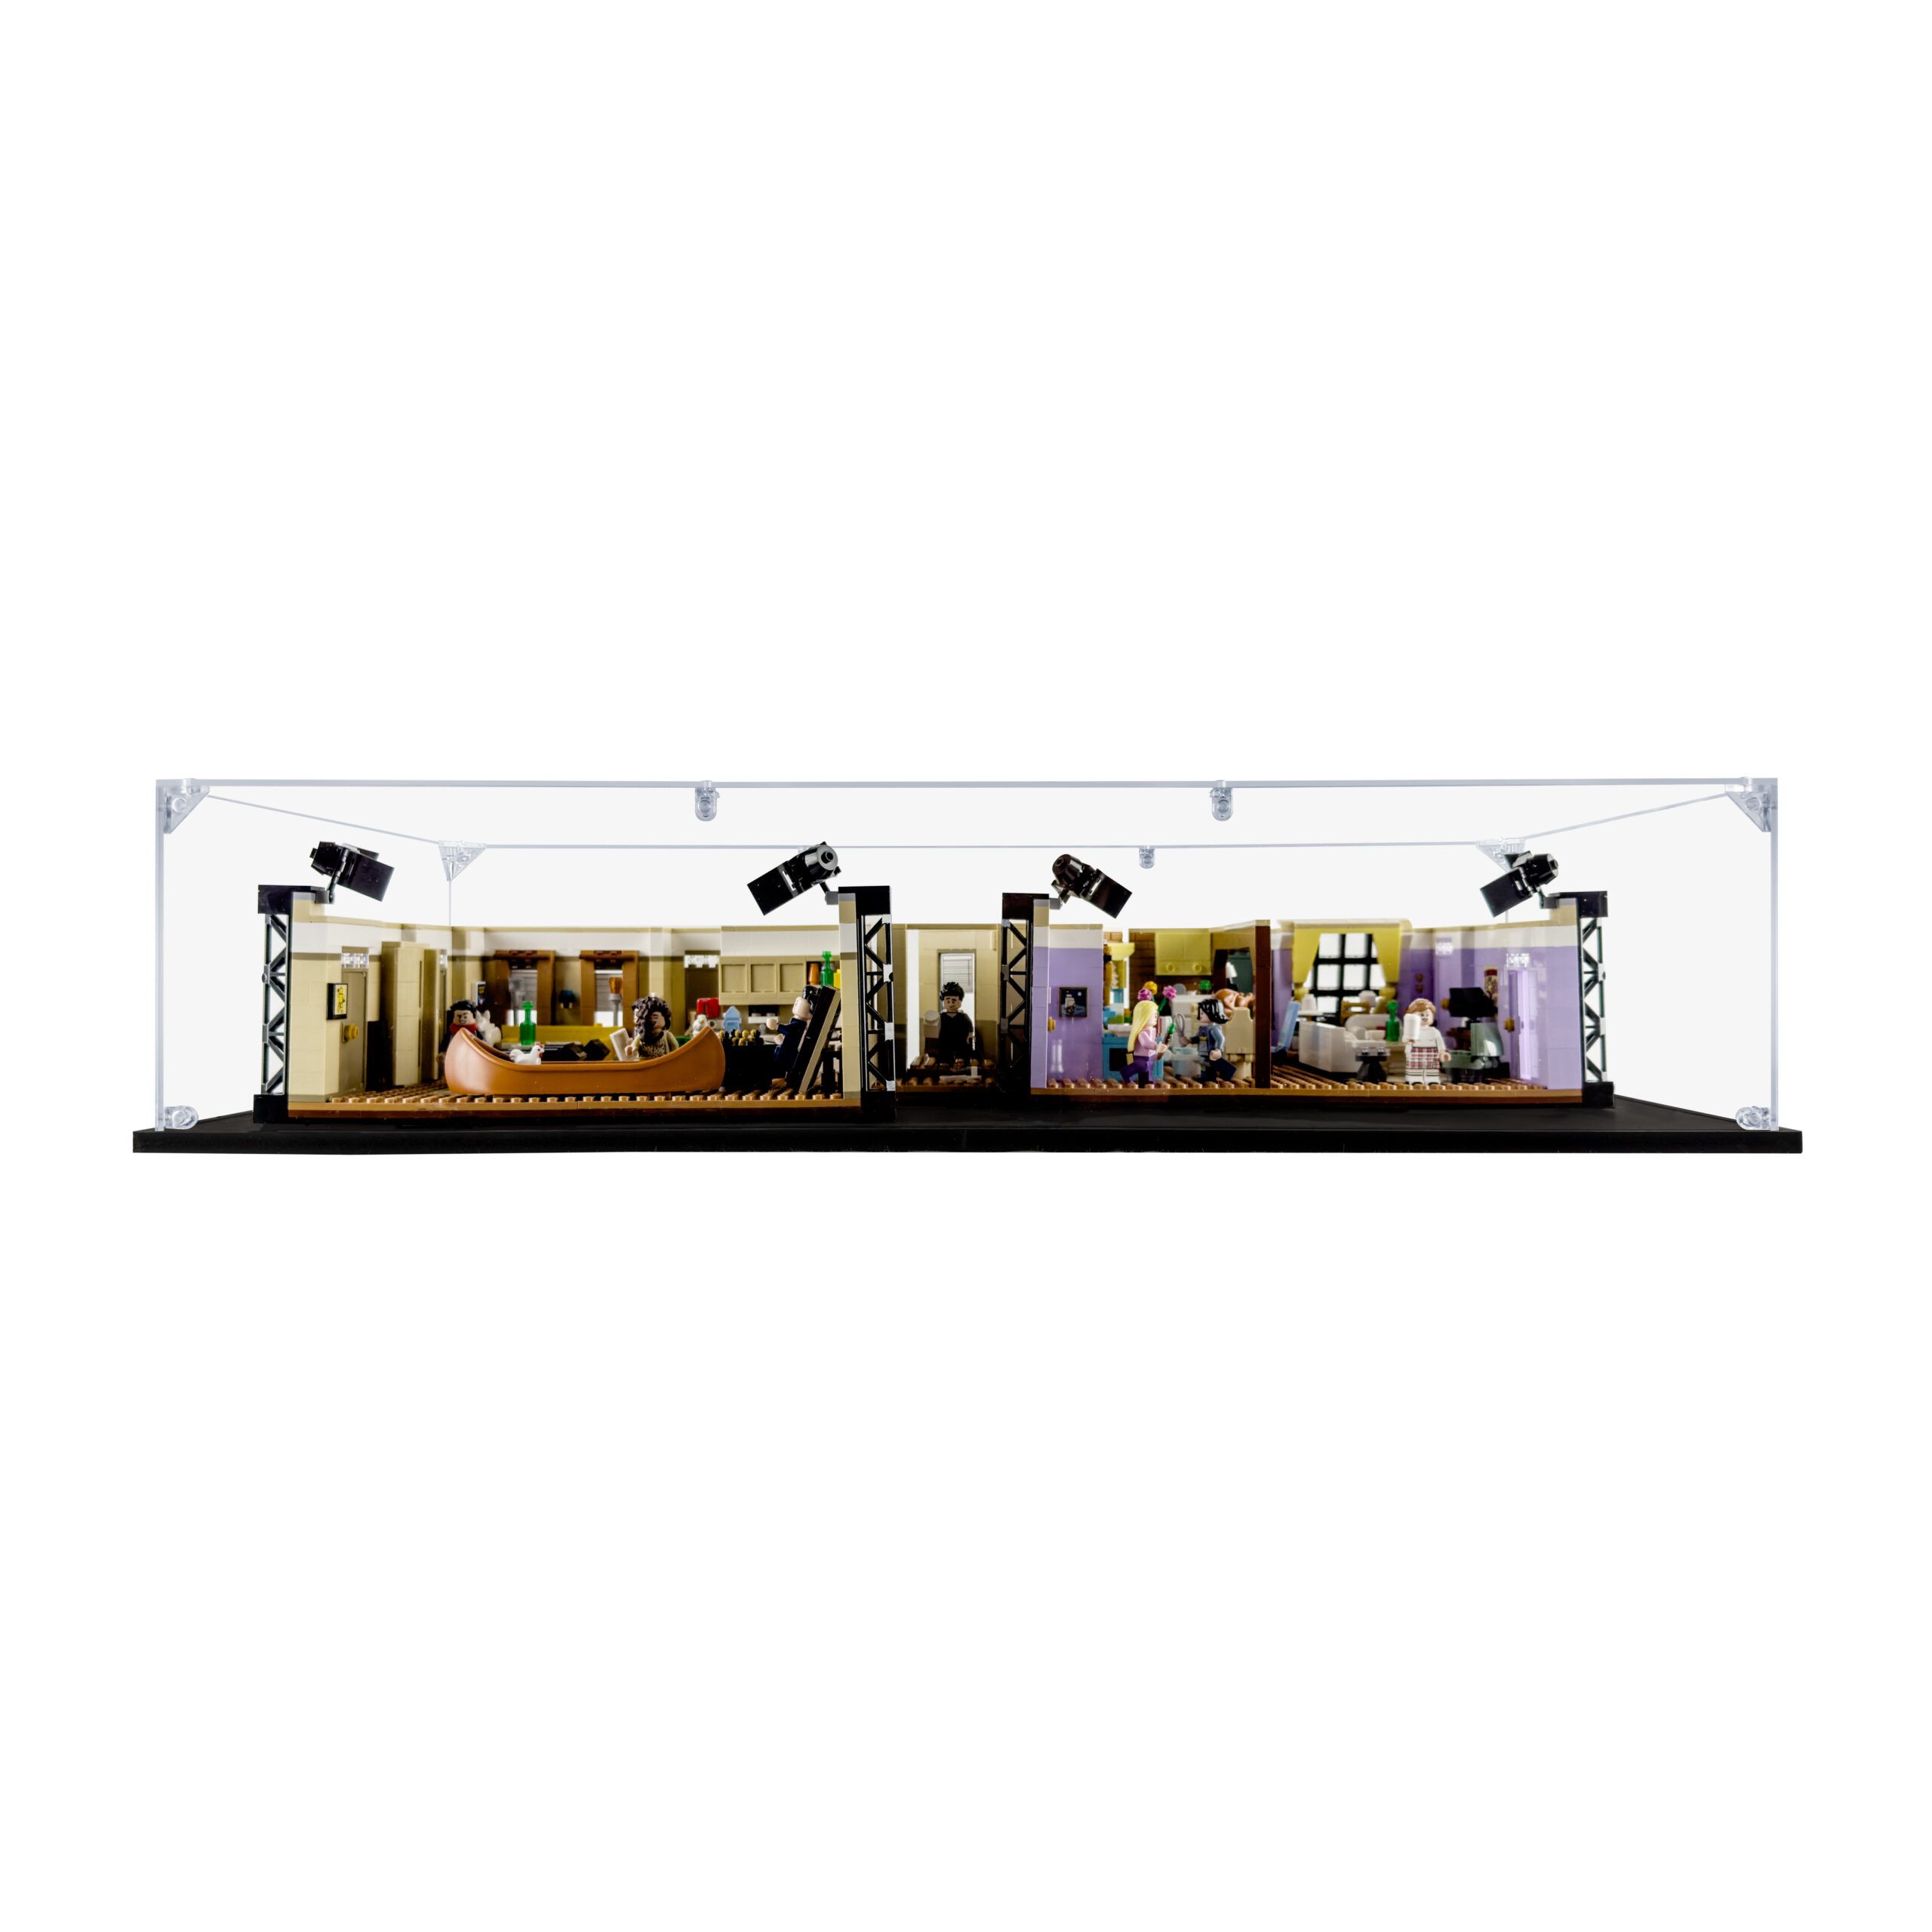 Acrylic Displays for your Lego Models-Lego 10292 The Friends